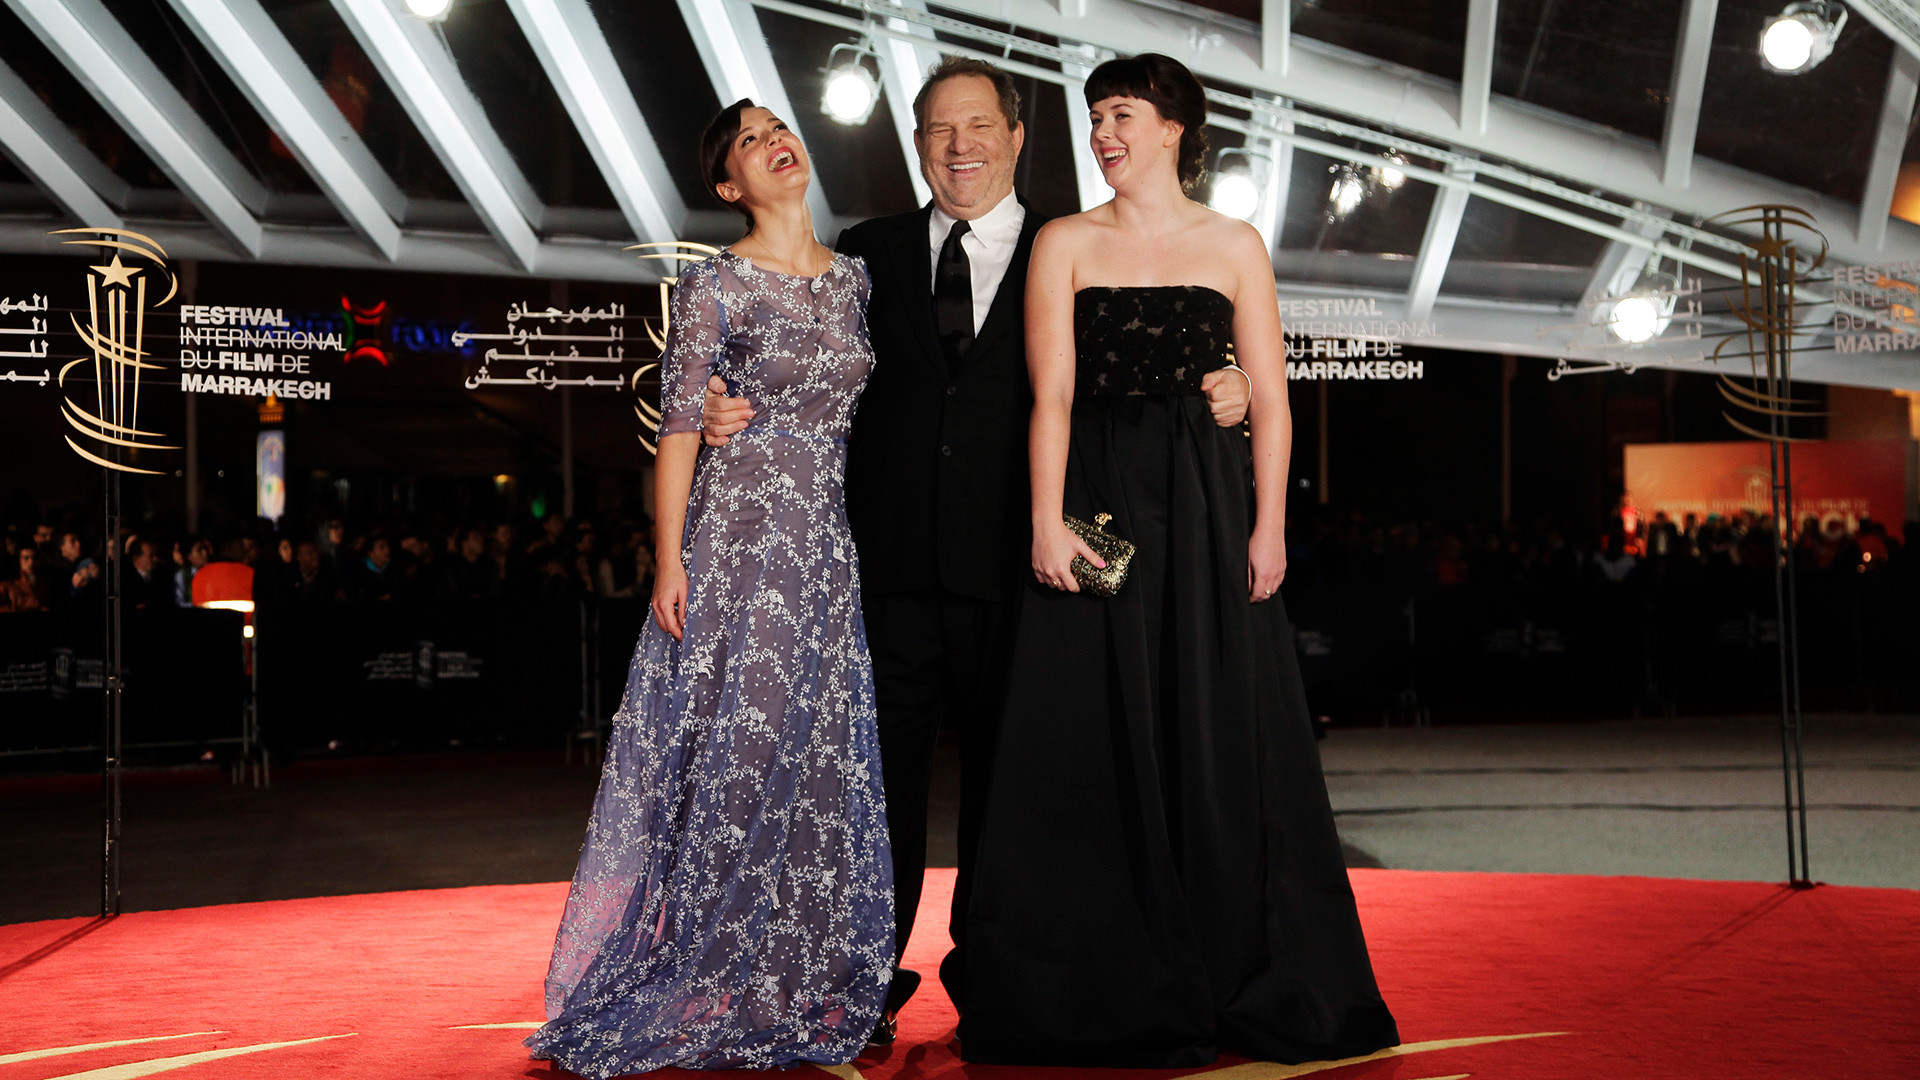 Producer Harvey Weinstein attends the 13th annual Marrakech International Film Festival with actresses Valeria Bilello (L) and Alexandra Roach (R)